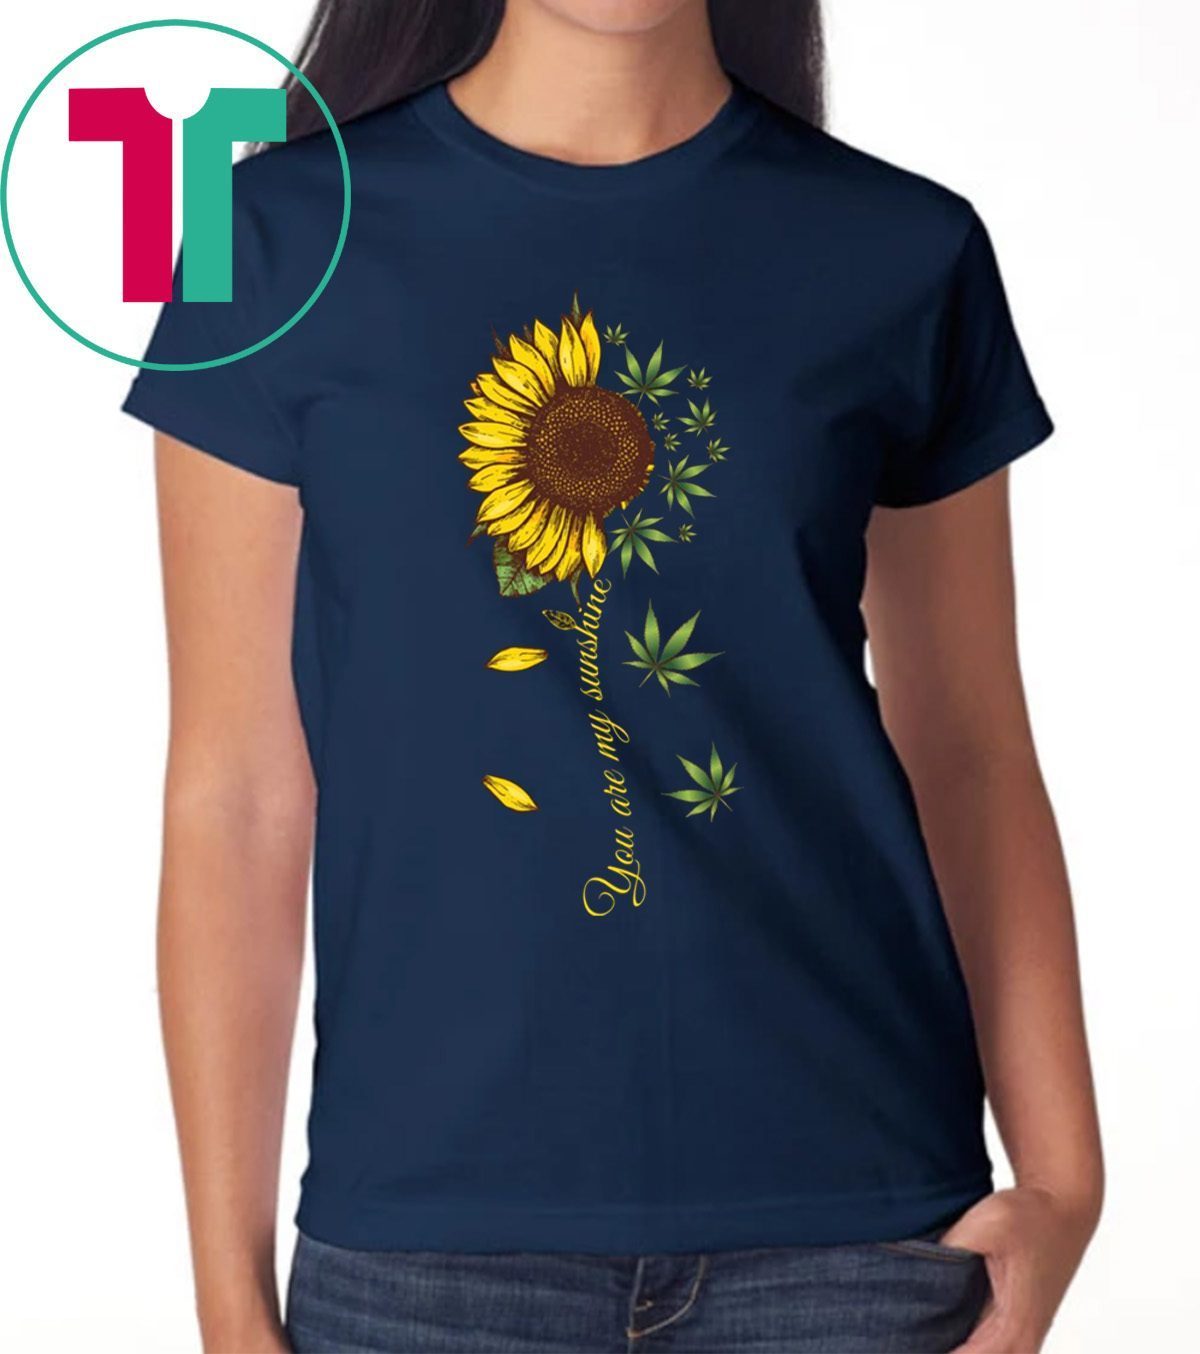 Sunflower Weed You Are My Sunshine Tee Shirt - OrderQuilt.com